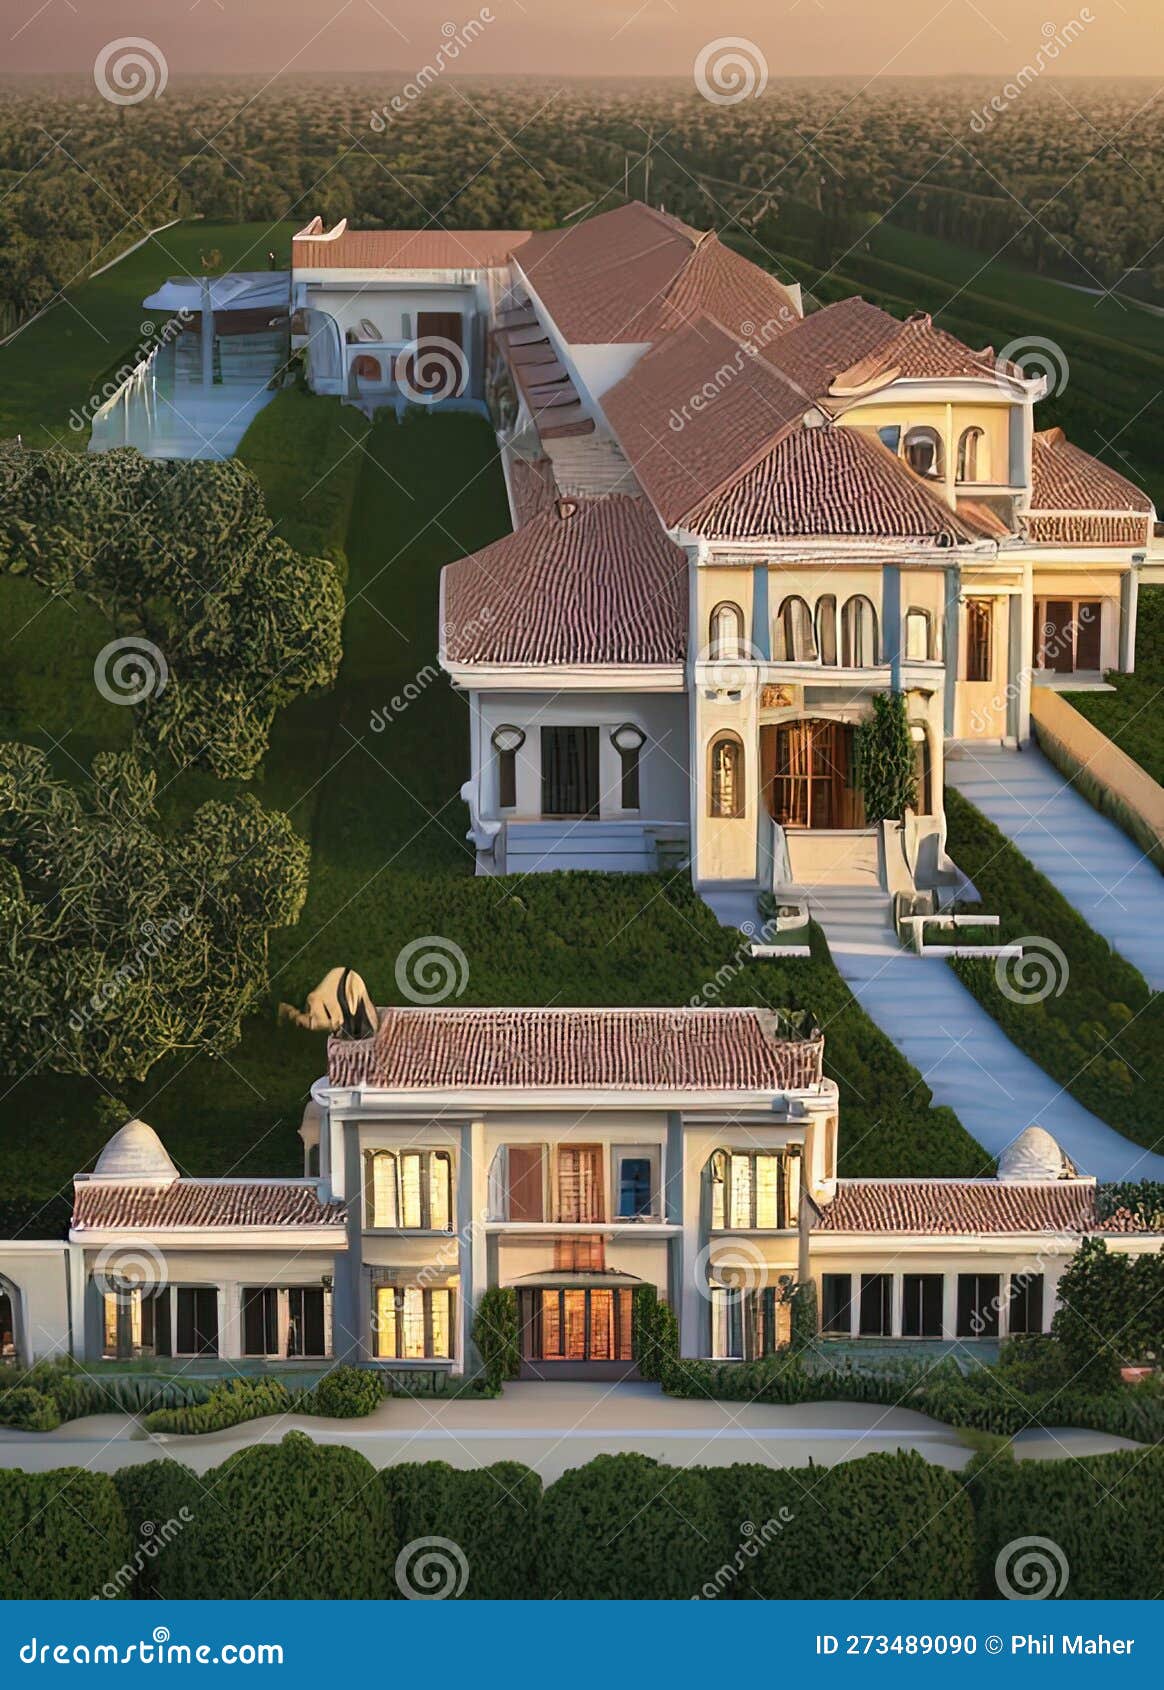 fictional mansion in chalco, mÃ©xico, mexico.